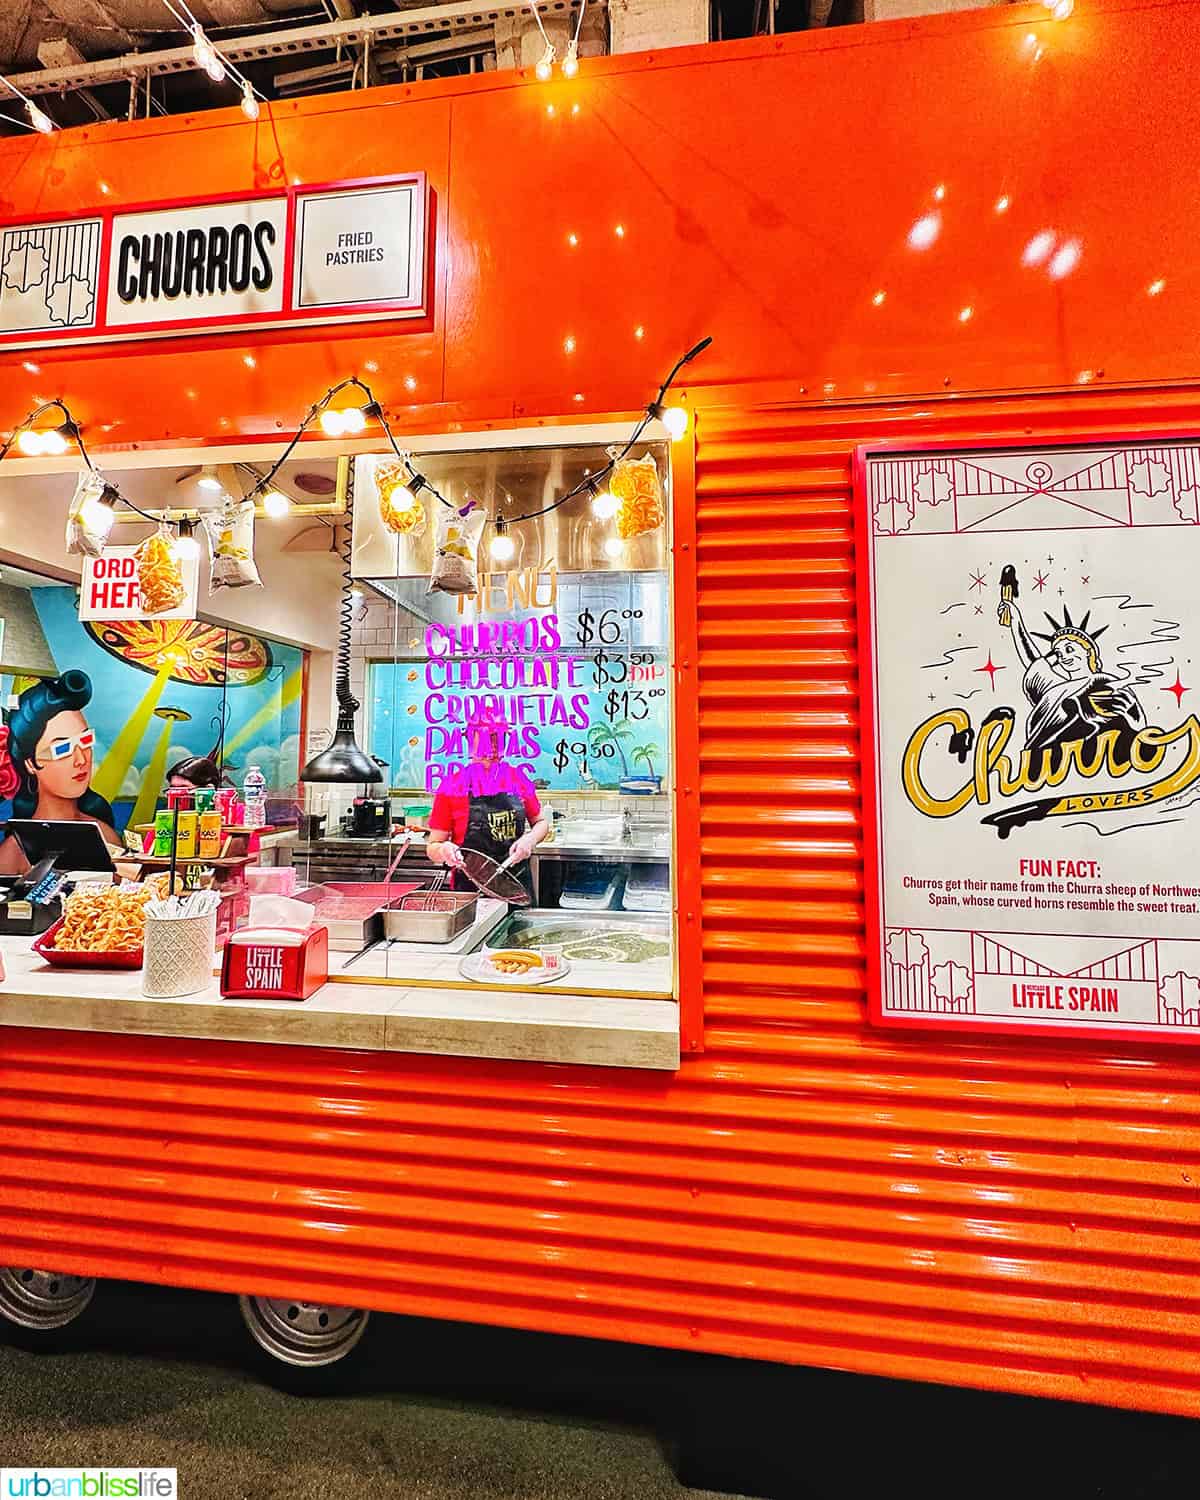 Churros cart at Mercado Little Spain in NYC.